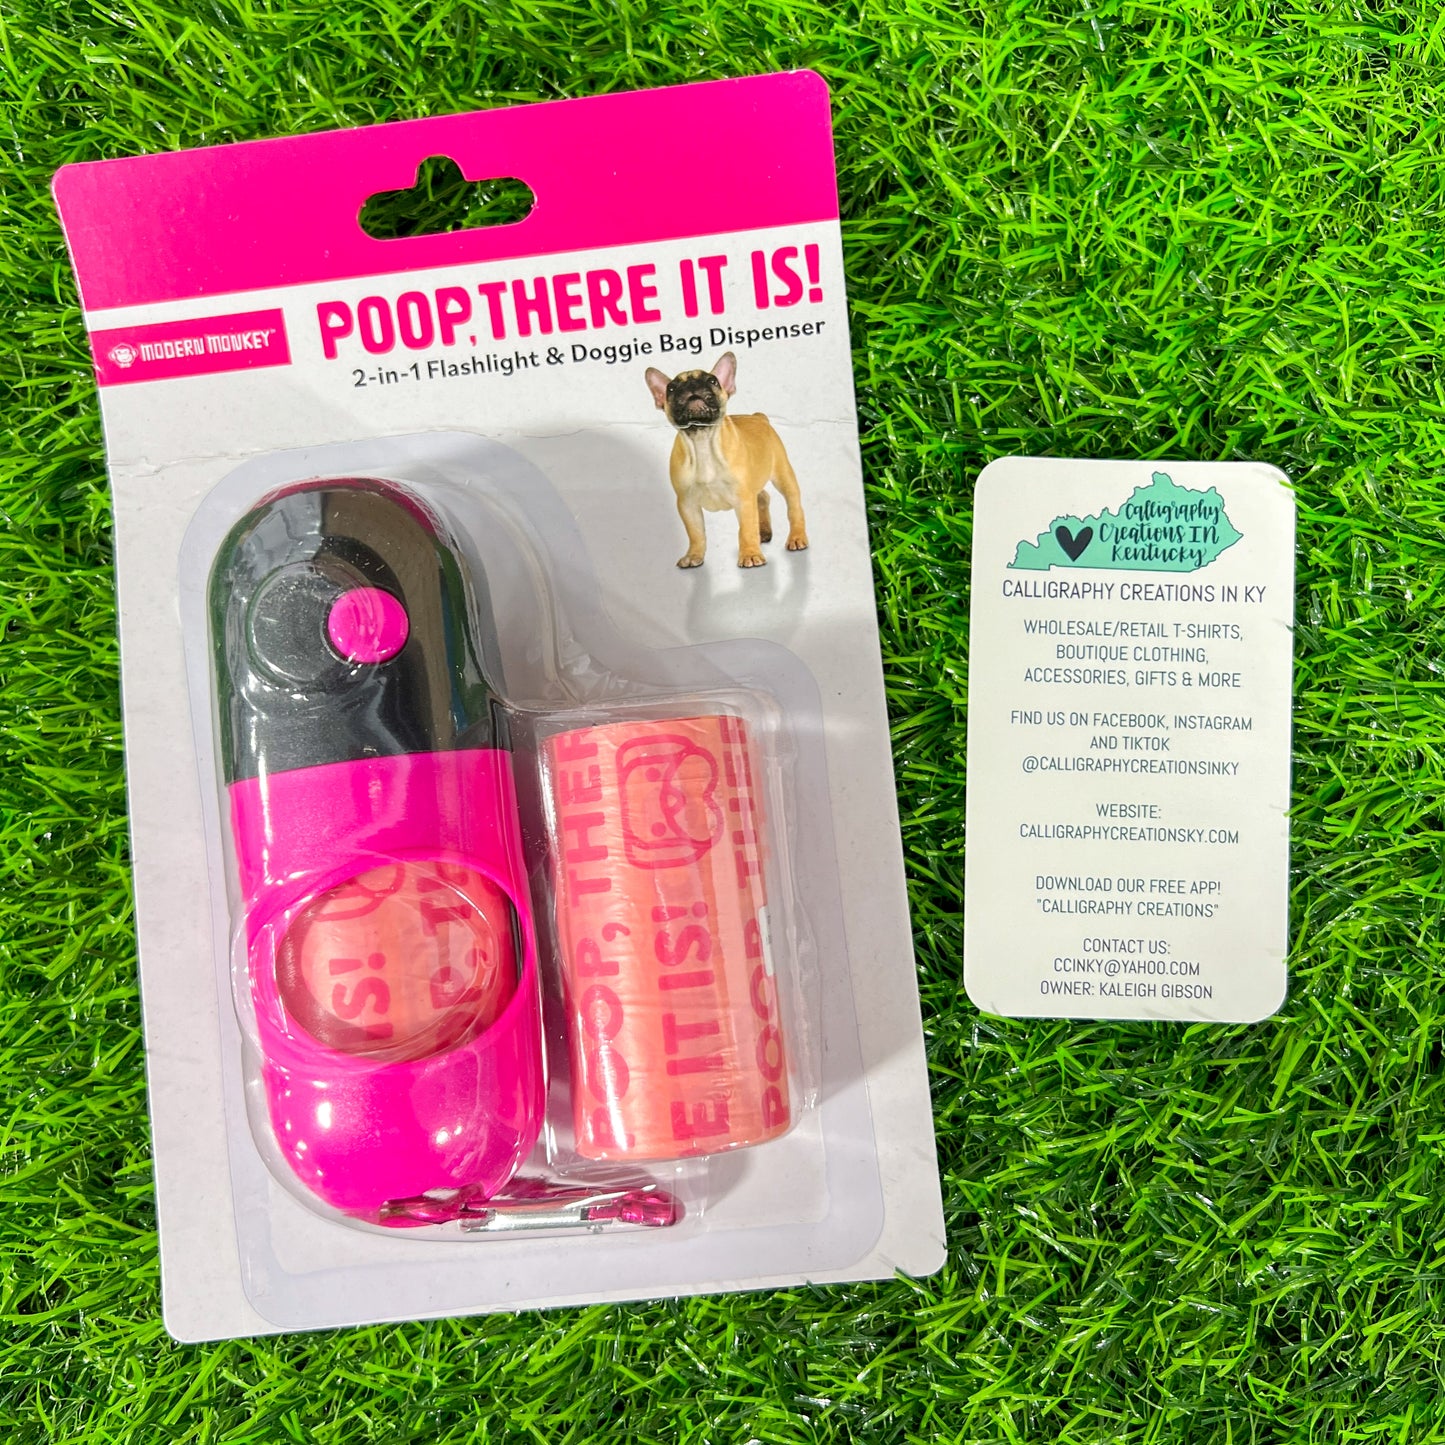 Poop! There It Is Flashlight & Doggie Bag Dispenser-pink